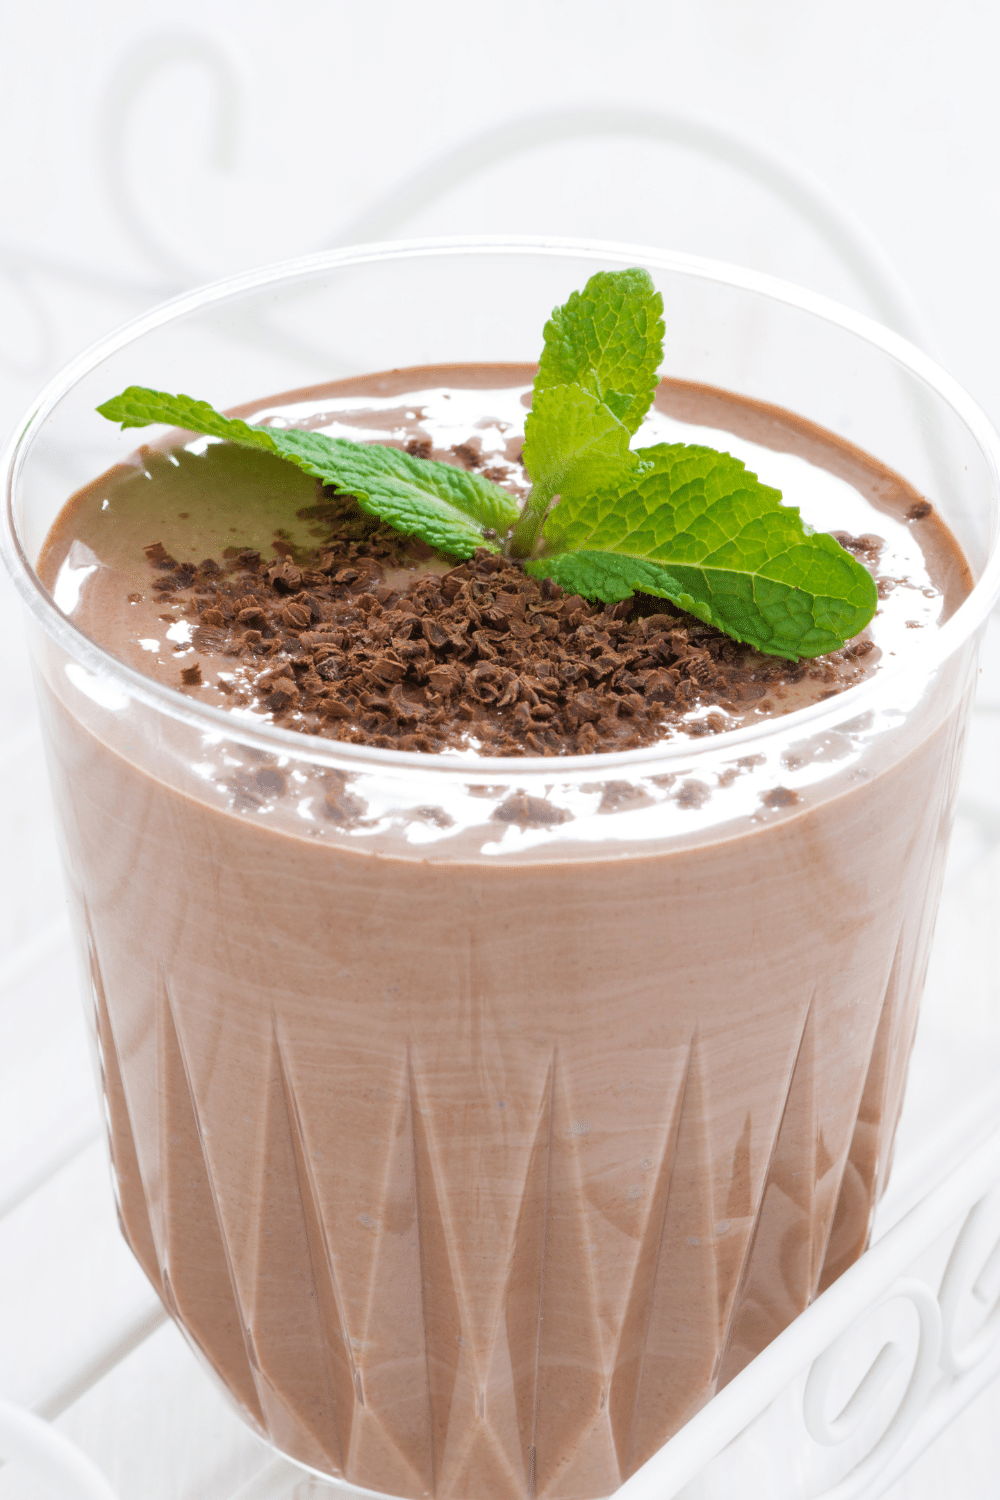 A green-tinted chocolate smoothie in a glass, garnished with fresh mint leaves and cacao nibs.